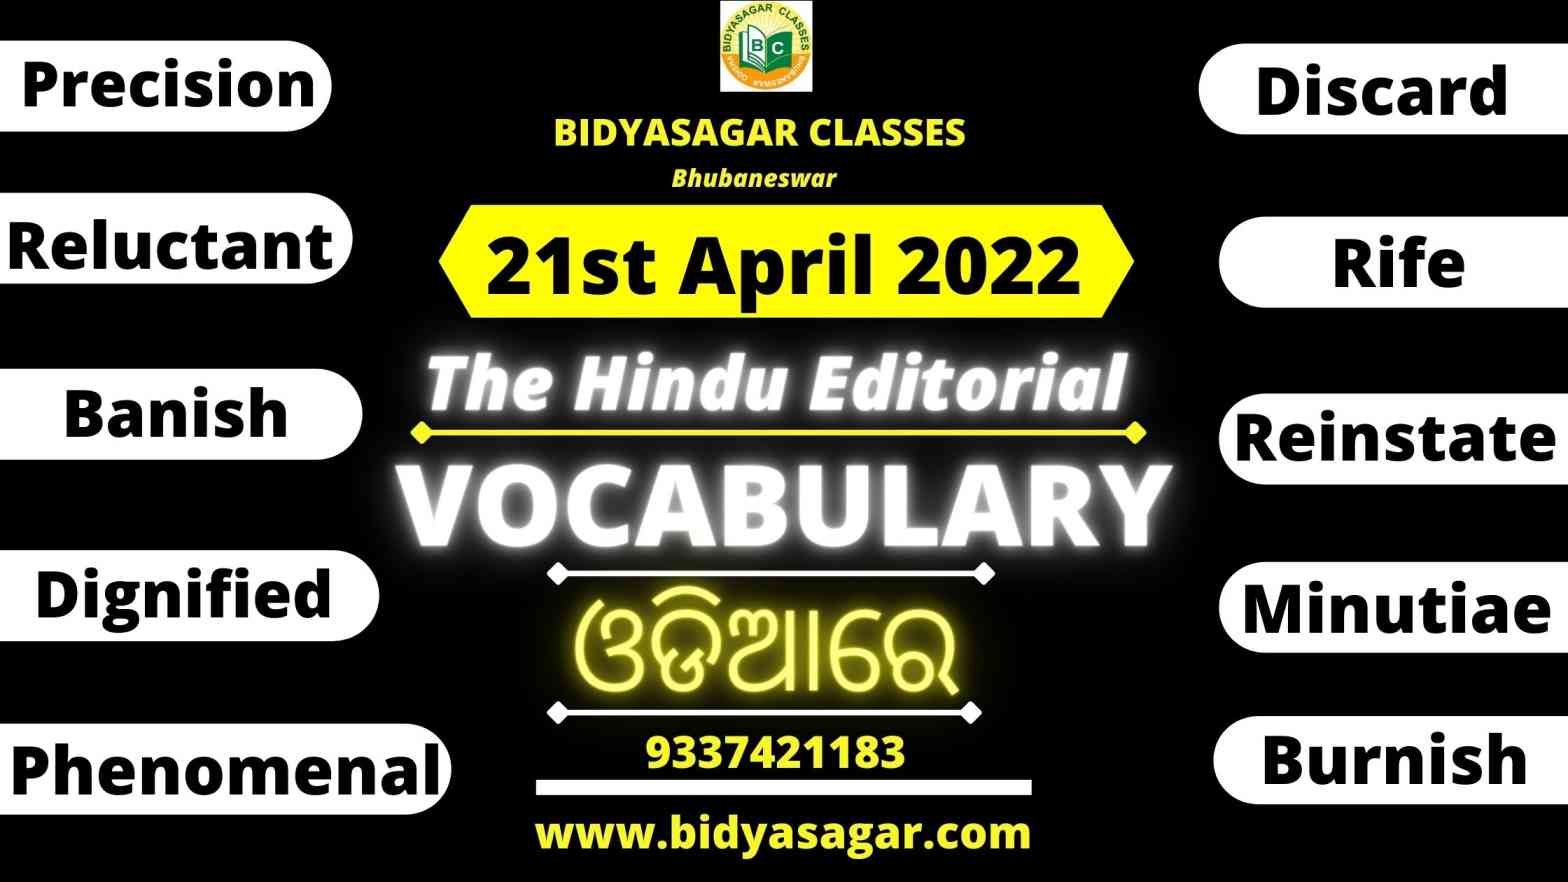 The Hindu Editorial Vocabulary of 21st April 2022